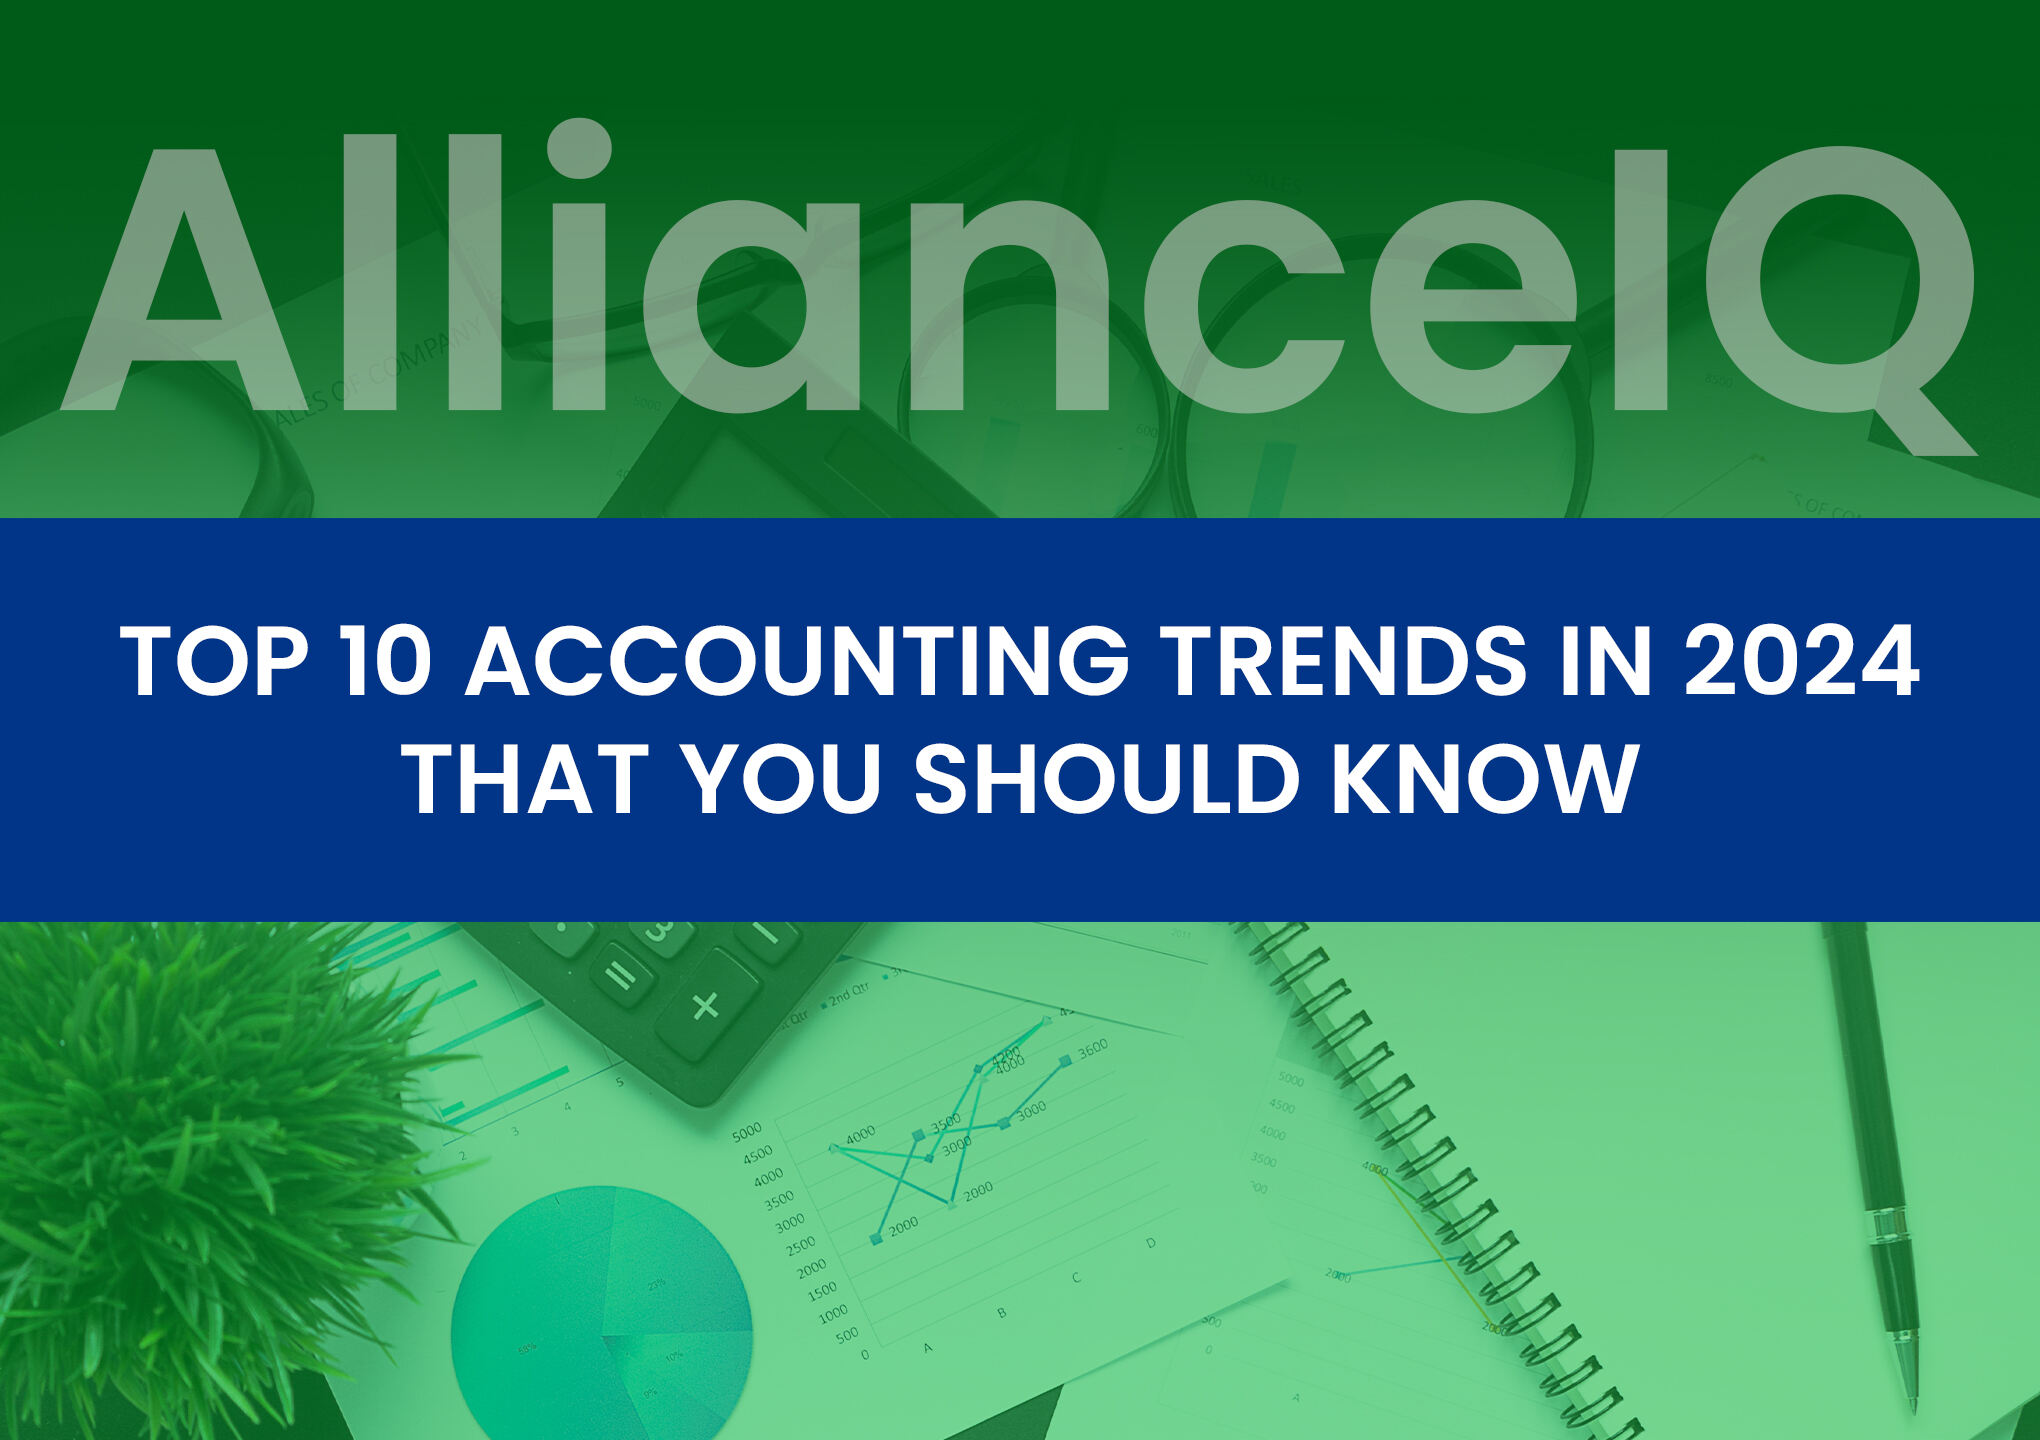 Top 10 Accounting Trends In 2024 That You Should Know